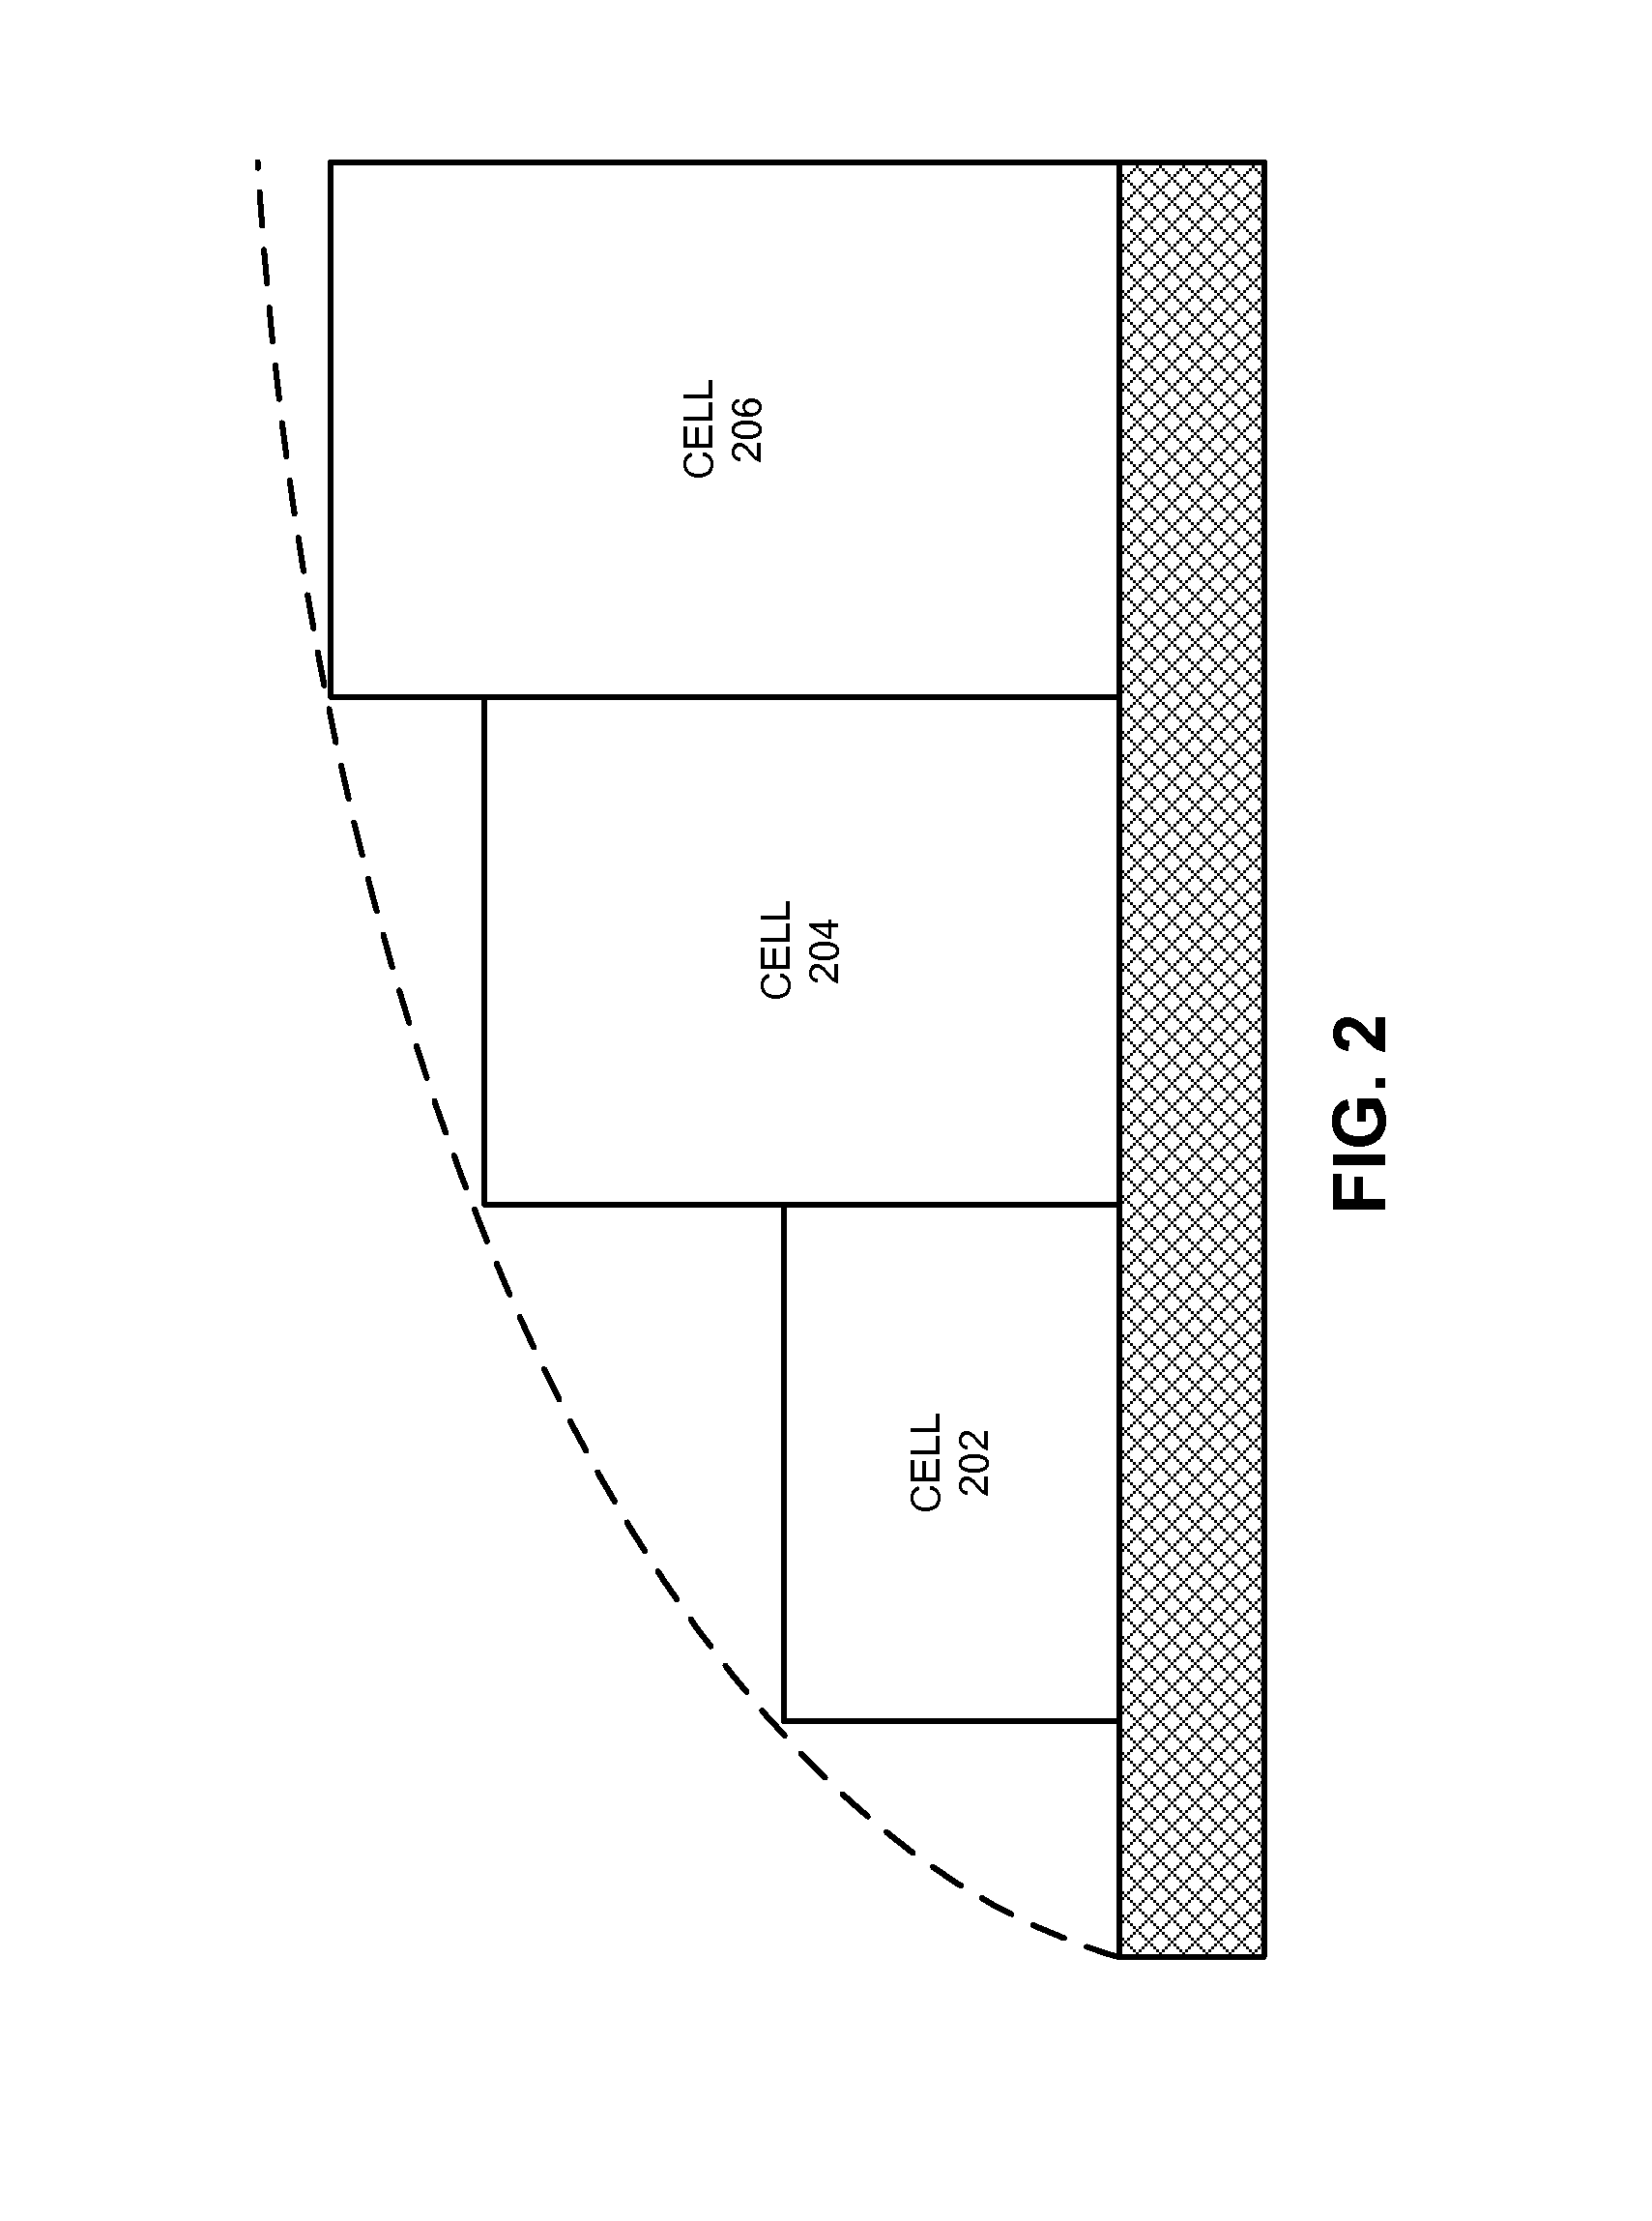 Battery pack with cells of different capacities electrically coupled in parallel